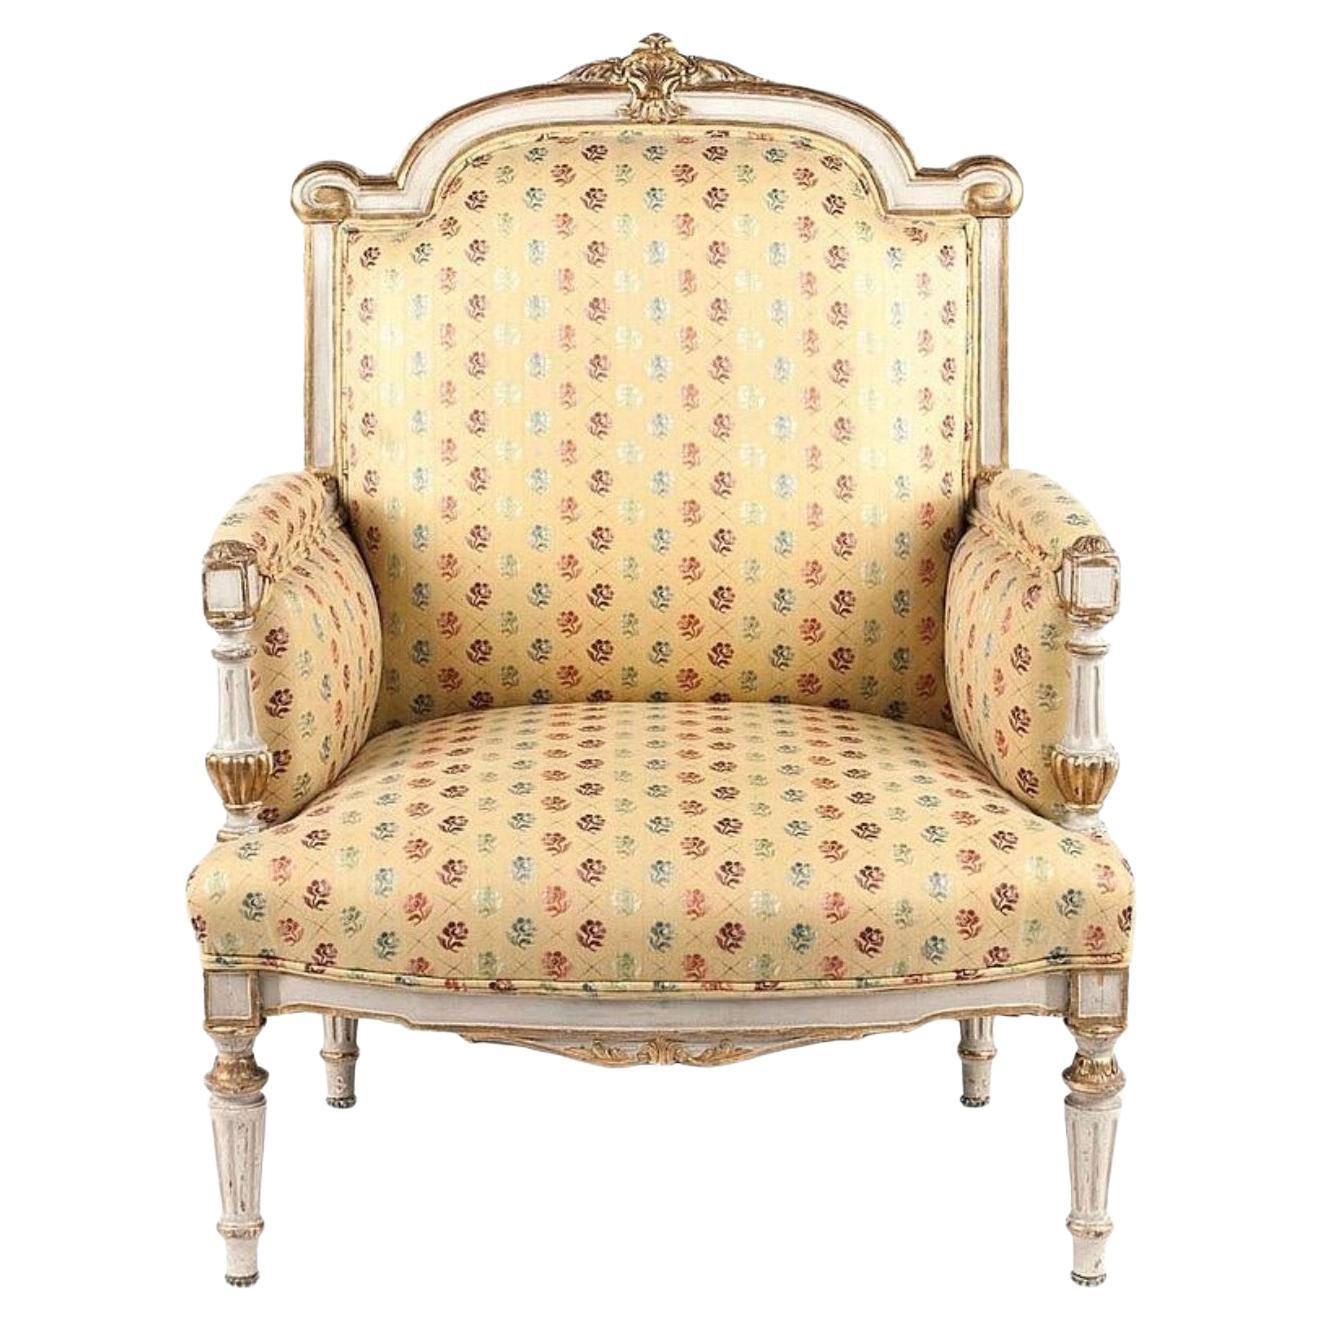 Italian Painted And Parcel Gilt Marquise Armchair, 19th Century For Sale